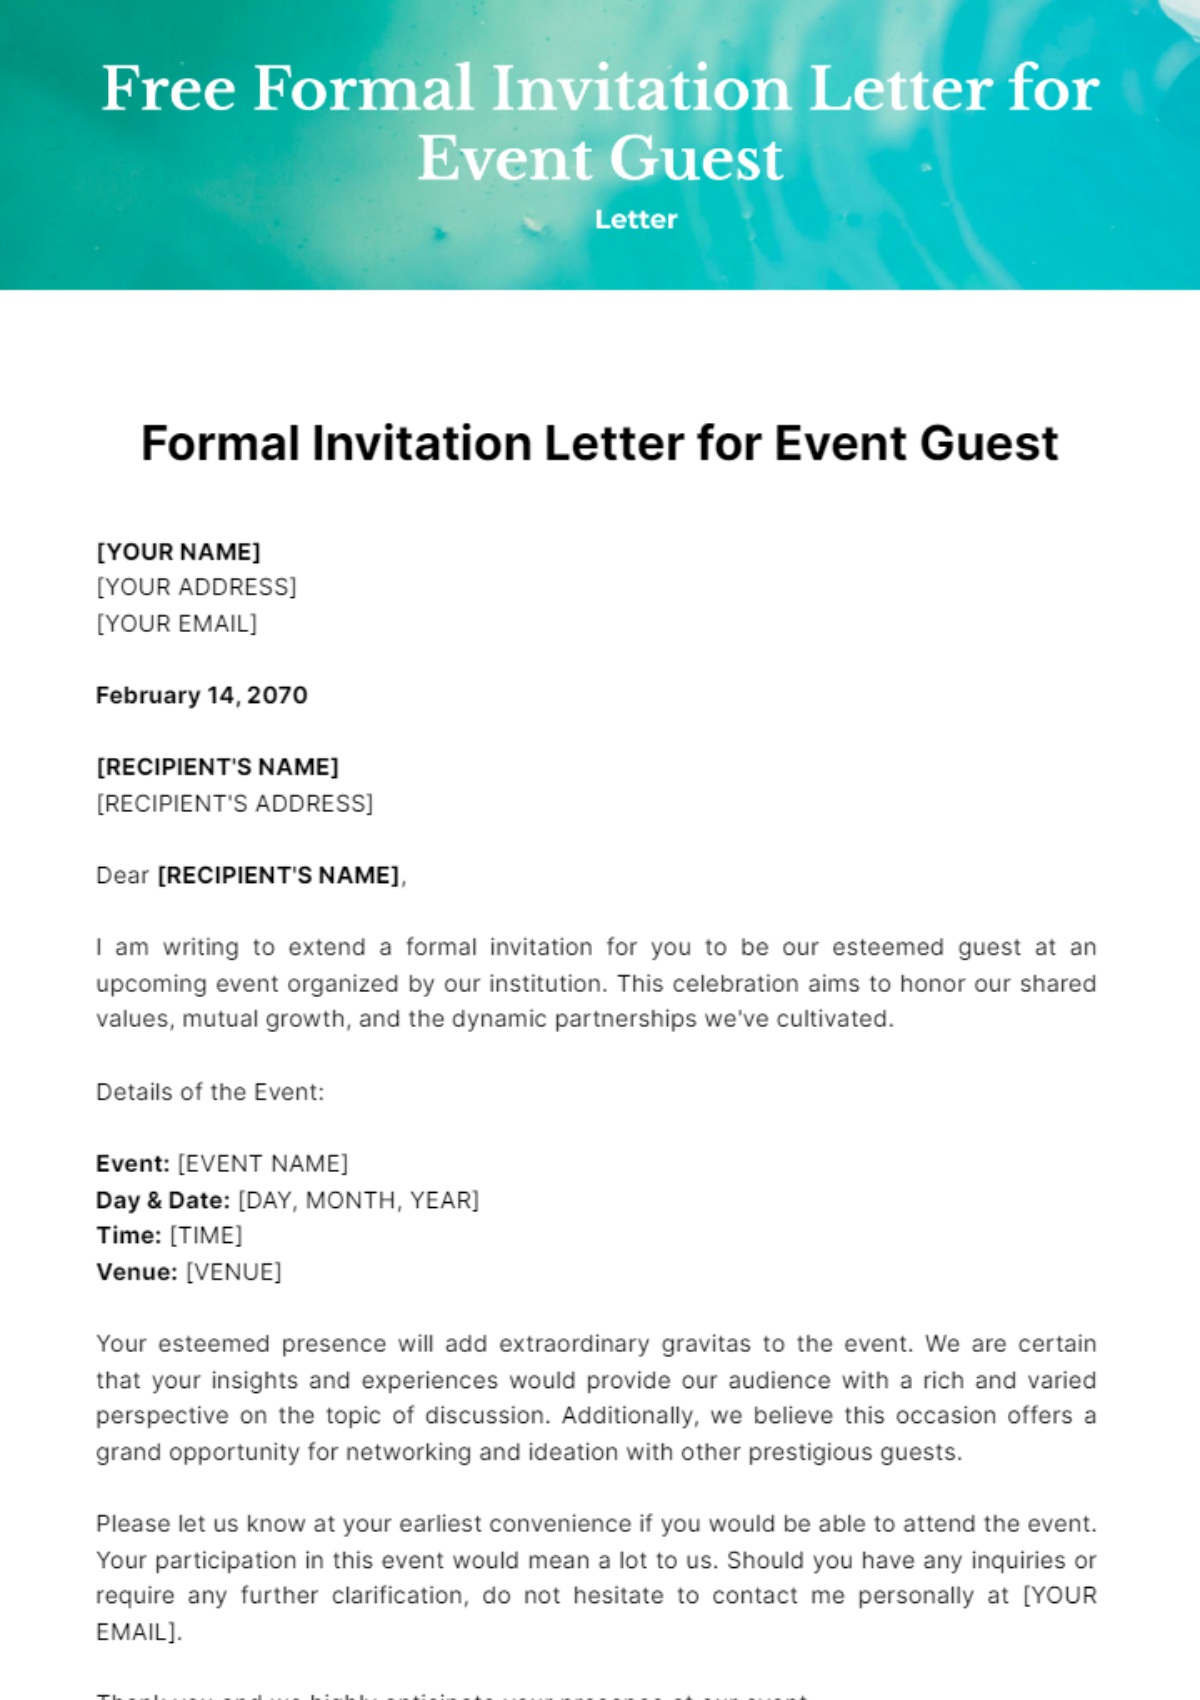 Free Formal Invitation Letter for Event Guest Template